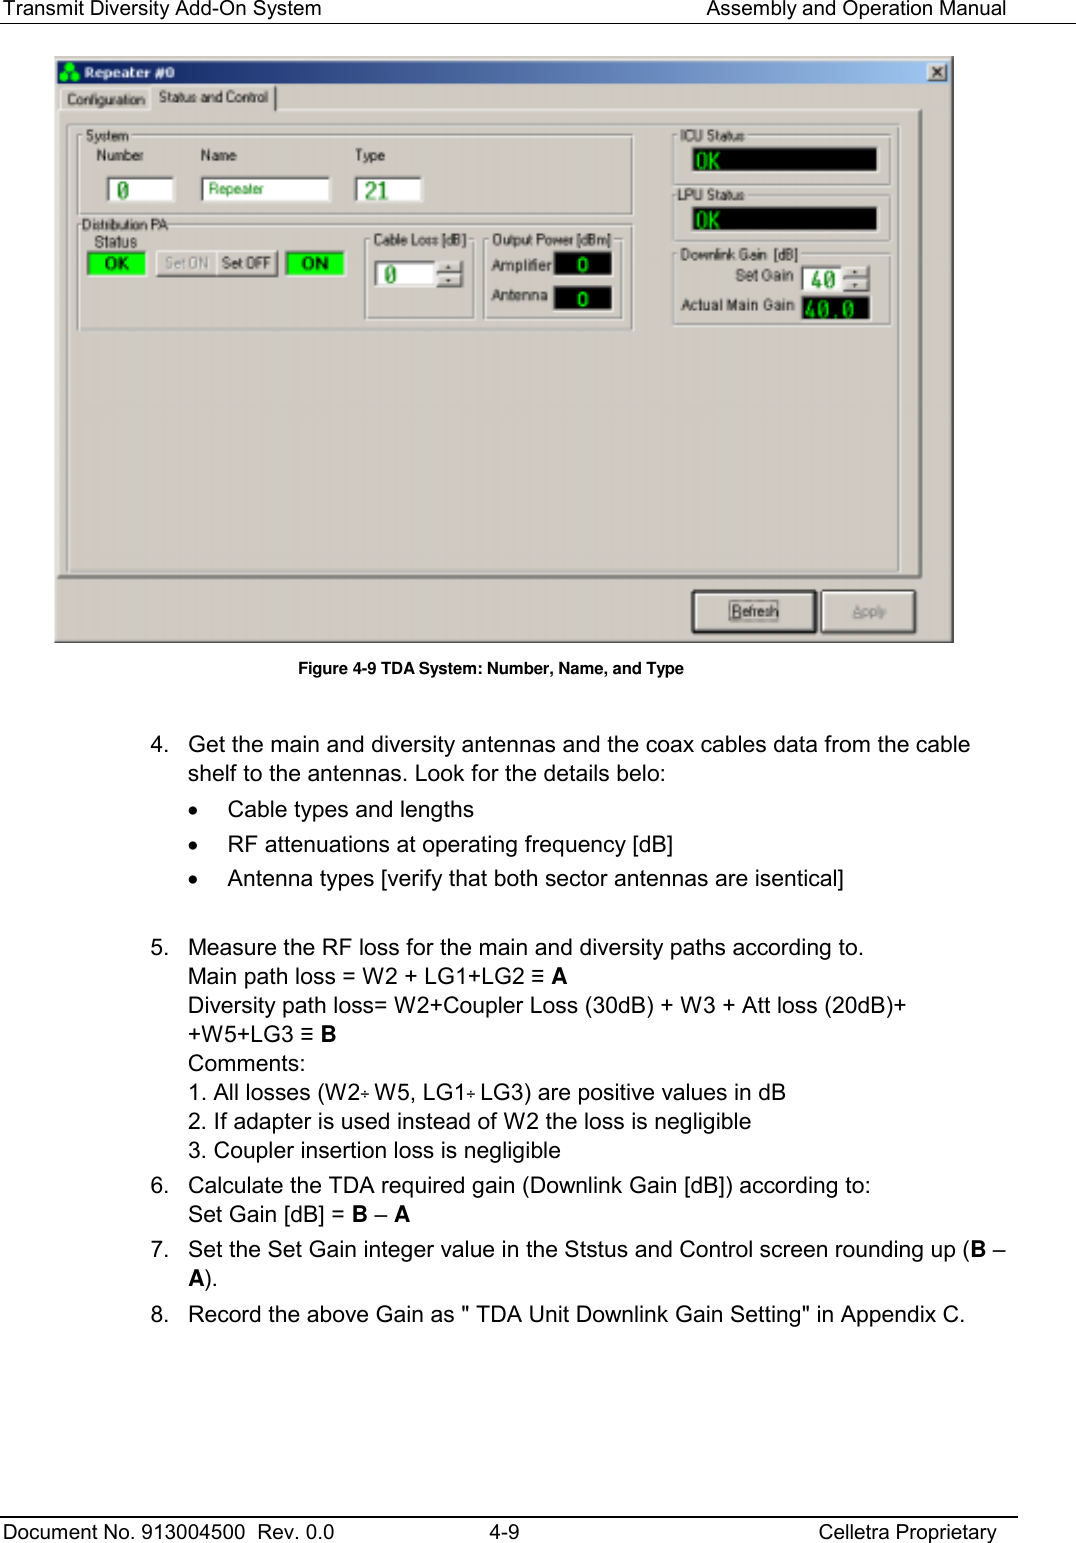 Transmit Diversity Add-On System   Assembly and Operation Manual  Document No. 913004500  Rev. 0.0  4-9  Celletra Proprietary   Figure  4-9 TDA System: Number, Name, and Type  4.  Get the main and diversity antennas and the coax cables data from the cable shelf to the antennas. Look for the details belo: •  Cable types and lengths •  RF attenuations at operating frequency [dB] •  Antenna types [verify that both sector antennas are isentical]  5.  Measure the RF loss for the main and diversity paths according to. Main path loss = W2 + LG1+LG2 ≡ A Diversity path loss= W2+Coupler Loss (30dB) + W3 + Att loss (20dB)+ +W5+LG3 ≡ B Comments: 1. All losses (W2÷ W5, LG1÷ LG3) are positive values in dB 2. If adapter is used instead of W2 the loss is negligible 3. Coupler insertion loss is negligible 6.  Calculate the TDA required gain (Downlink Gain [dB]) according to: Set Gain [dB] = B – A 7.  Set the Set Gain integer value in the Ststus and Control screen rounding up (B – A). 8.  Record the above Gain as &quot; TDA Unit Downlink Gain Setting&quot; in Appendix C.     